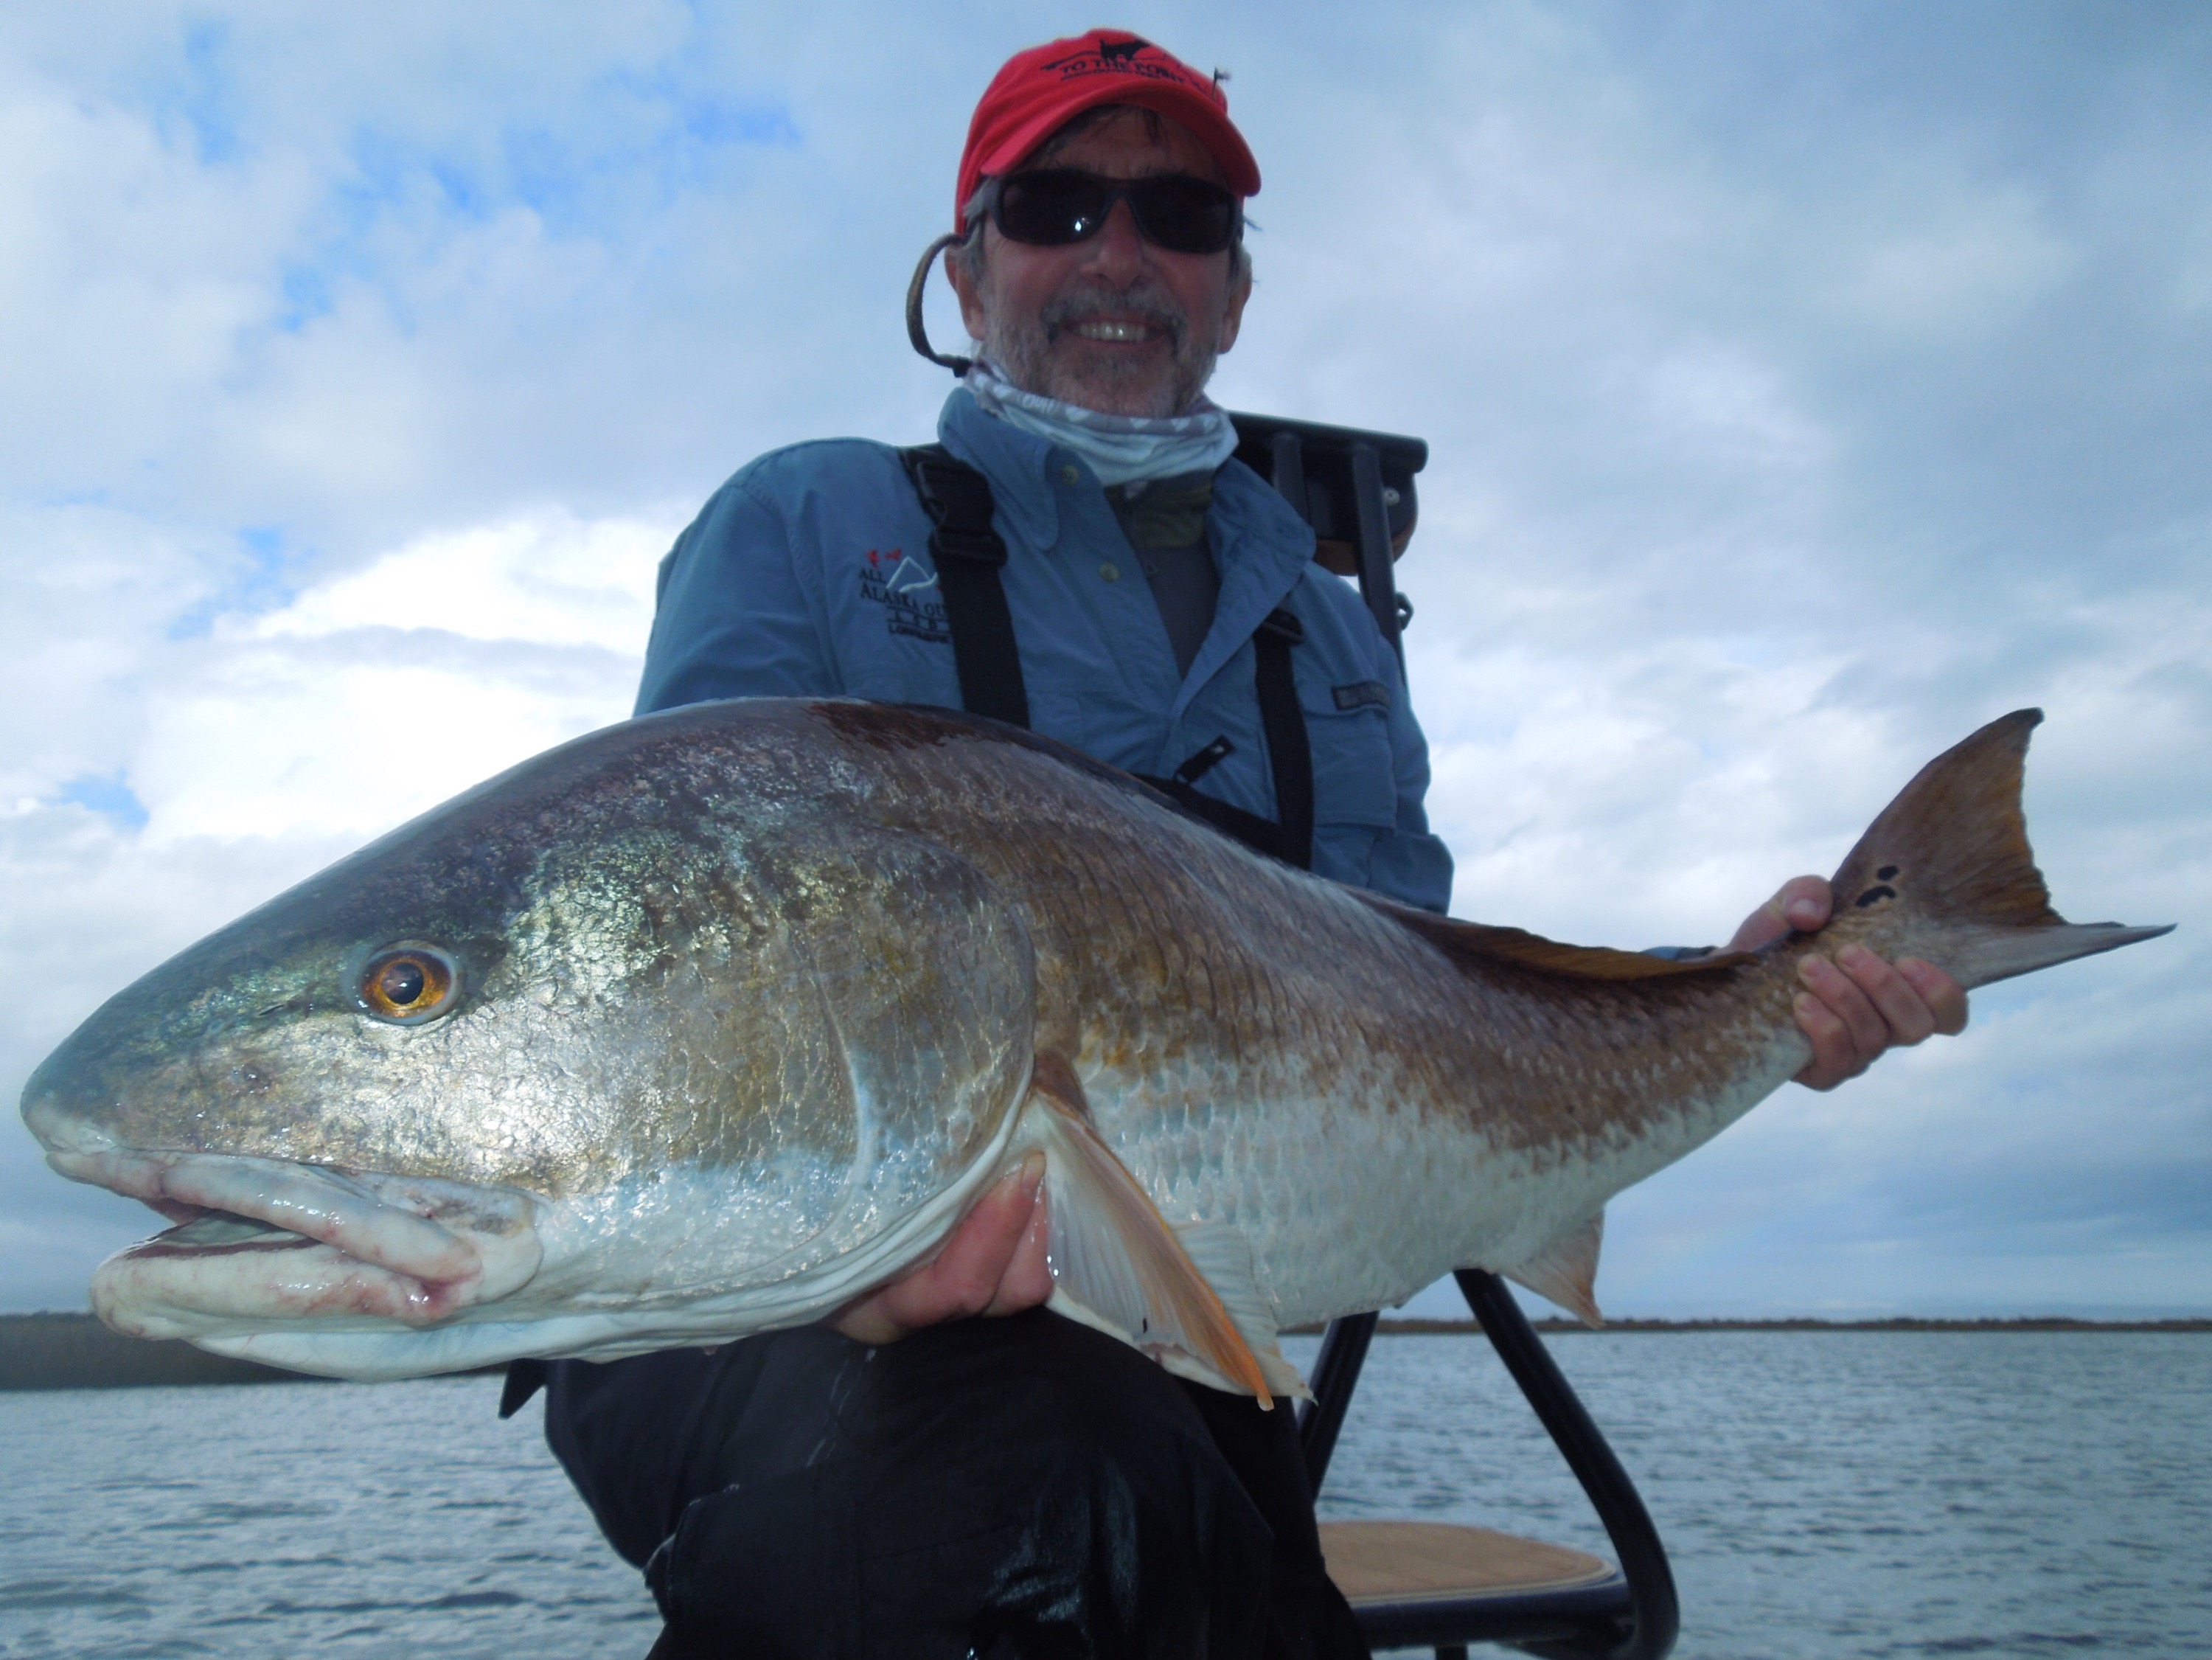 Man smiles with the huge redfish he captured